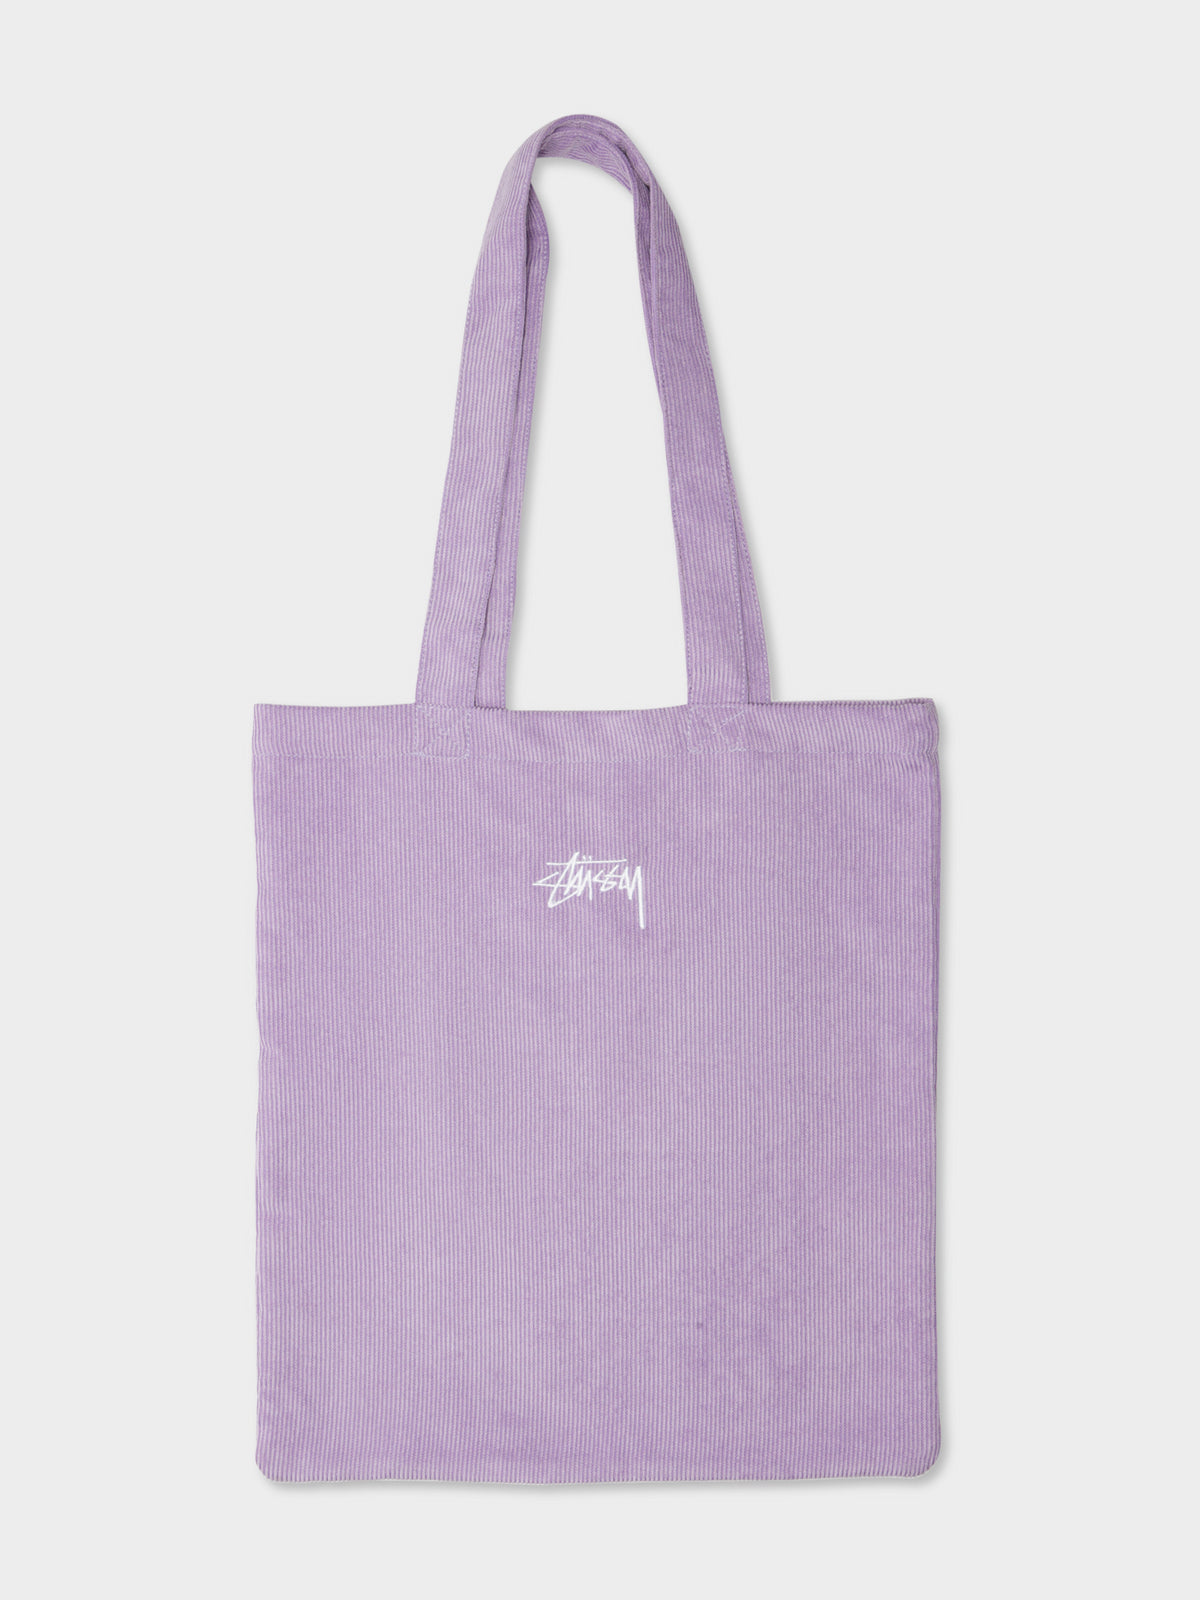 Logo Cord Tote Bag in Washed Purple Corduroy